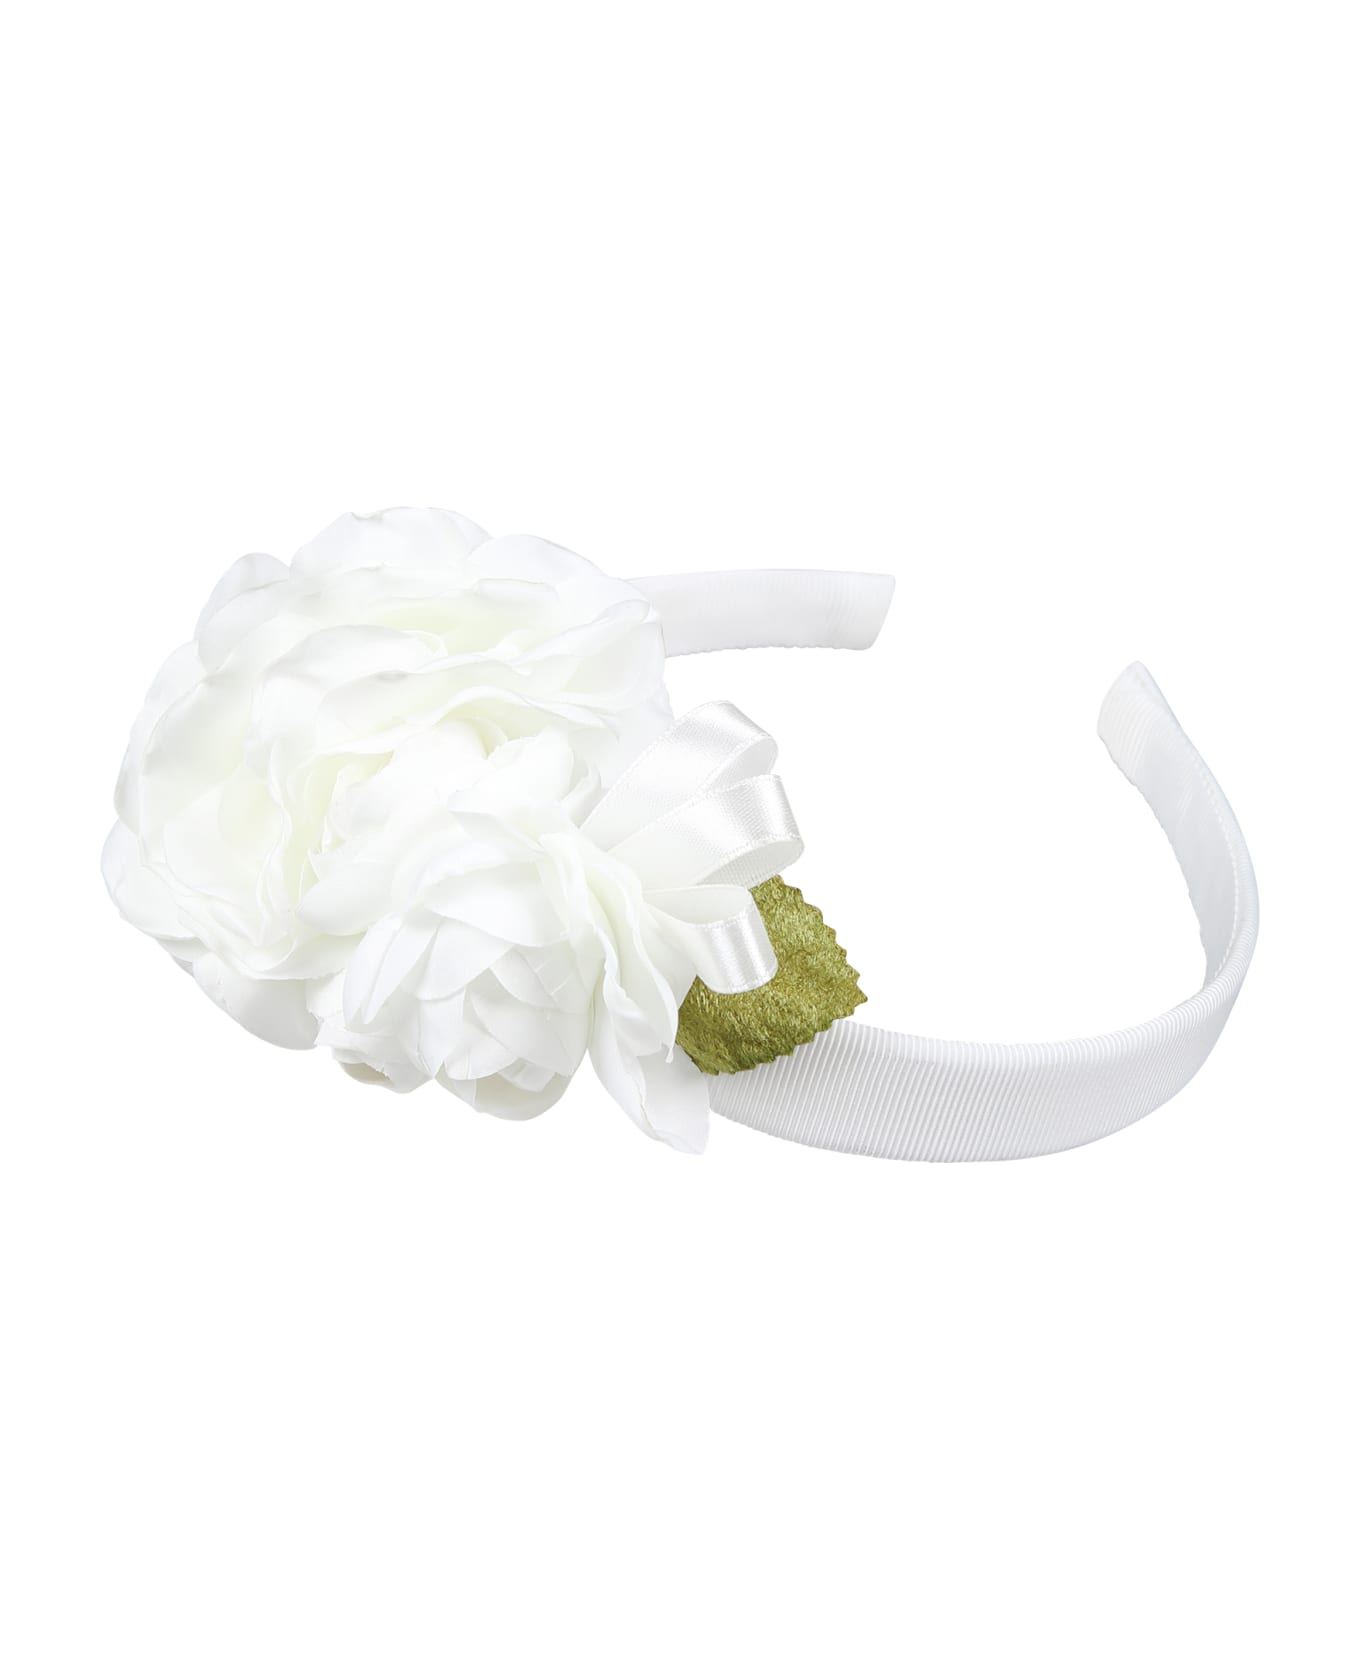 Monnalisa White Headband For Girl With Flowers - White アクセサリー＆ギフト